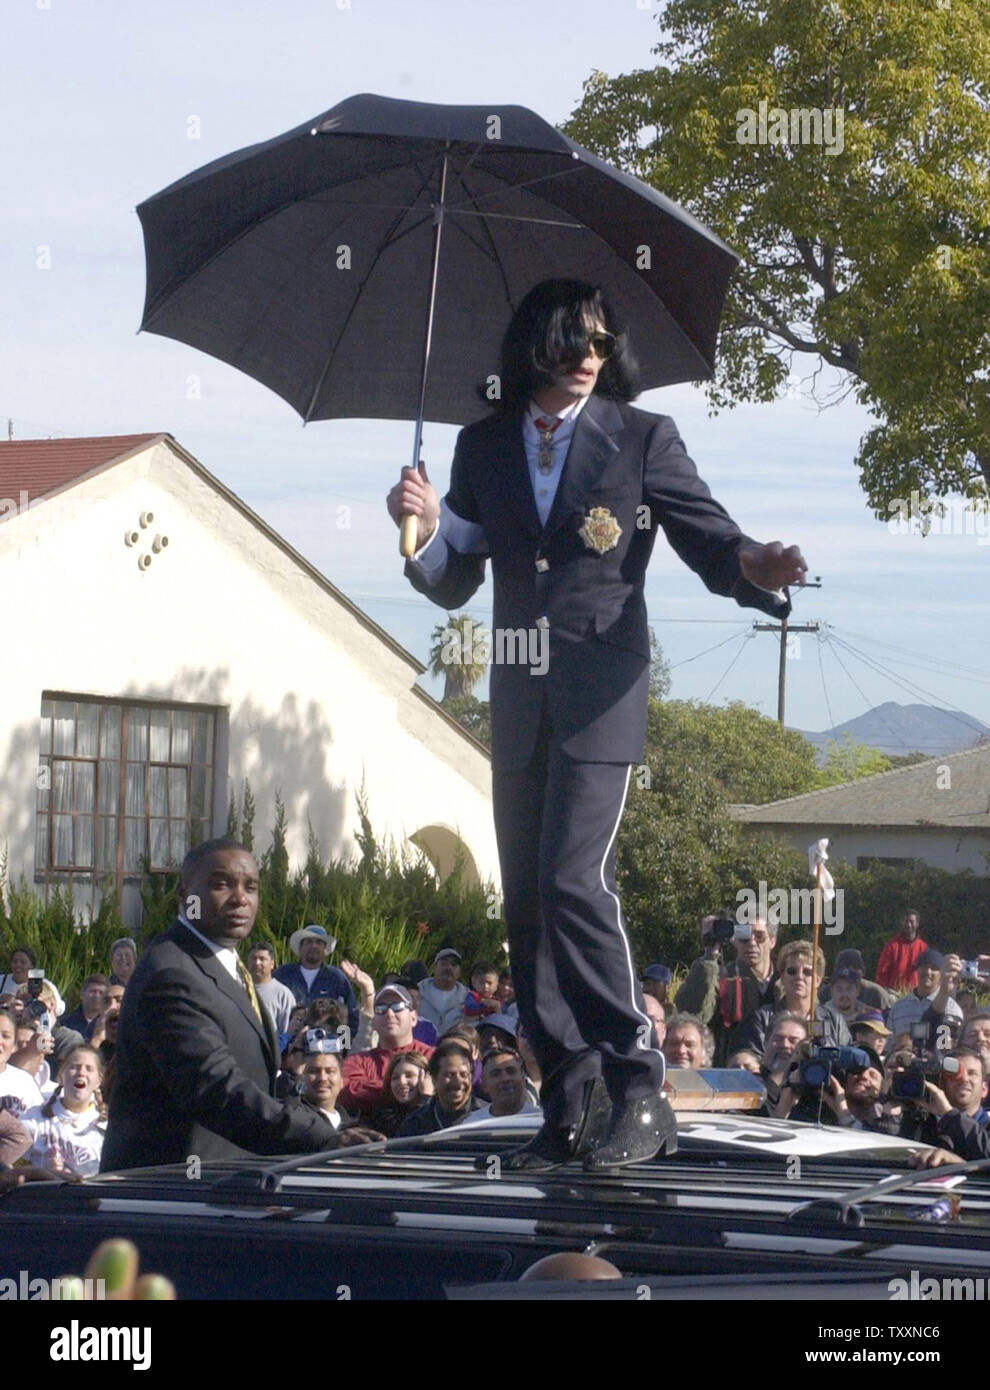 Pop star Michael Jackson dances atop  his SUV after leaving the courthouse in Santa Maria, California January 16, 2004. Jackson pleaded innocent to child molestation charges on Friday during a hearing in which a California judge gave the onetime 'King of Pop' a stern lecture for showing up late and slapped a gag order on his high-profile legal team. The two men with Jackson are his personal videographers.  (UPI Photo/Jim Ruymen) Stock Photo